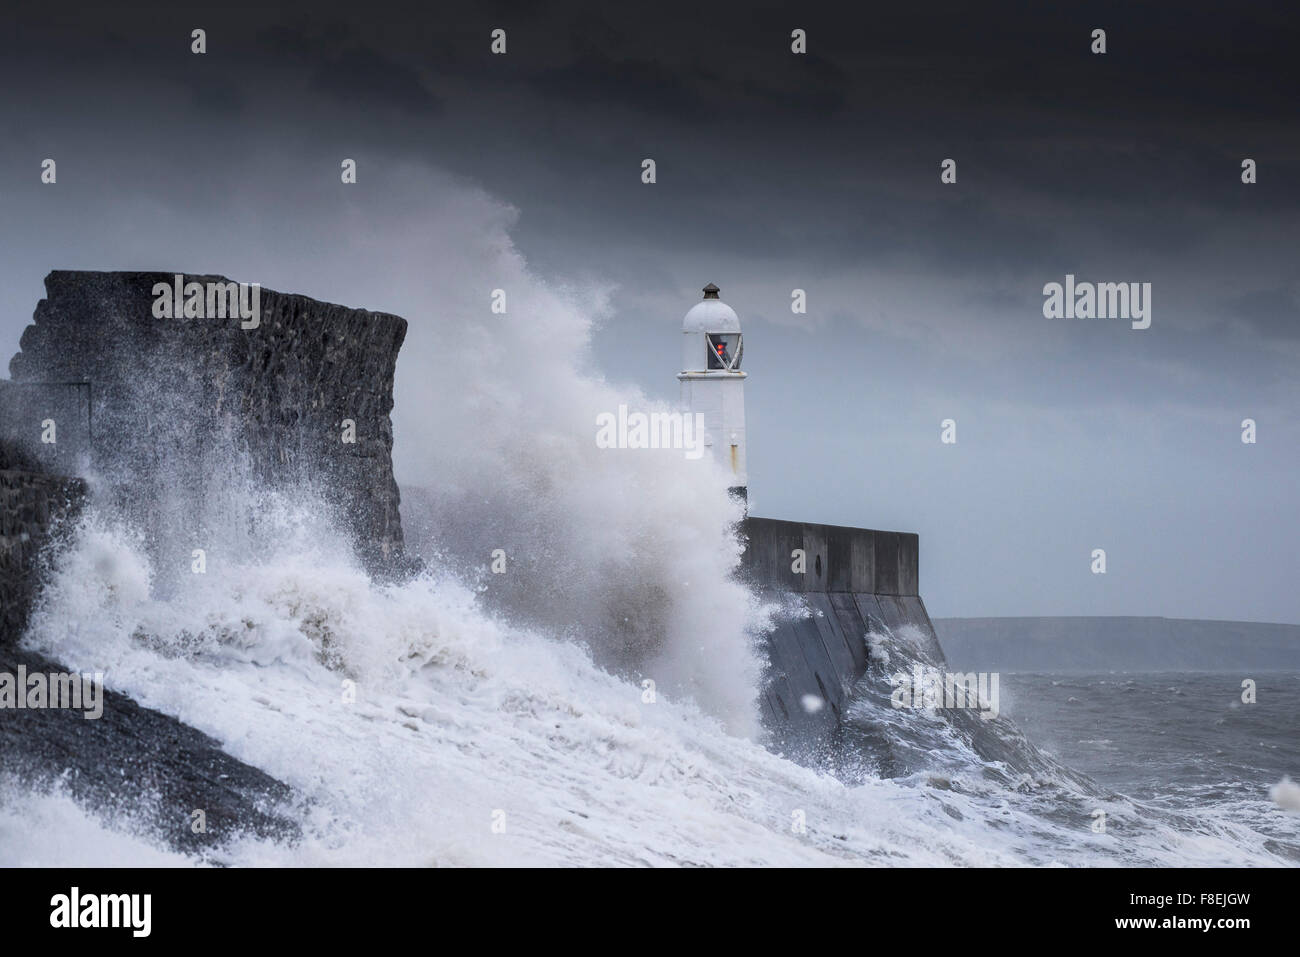 Wild seas as a storm batters the coast of Porthcawl in South Wales. Stock Photo